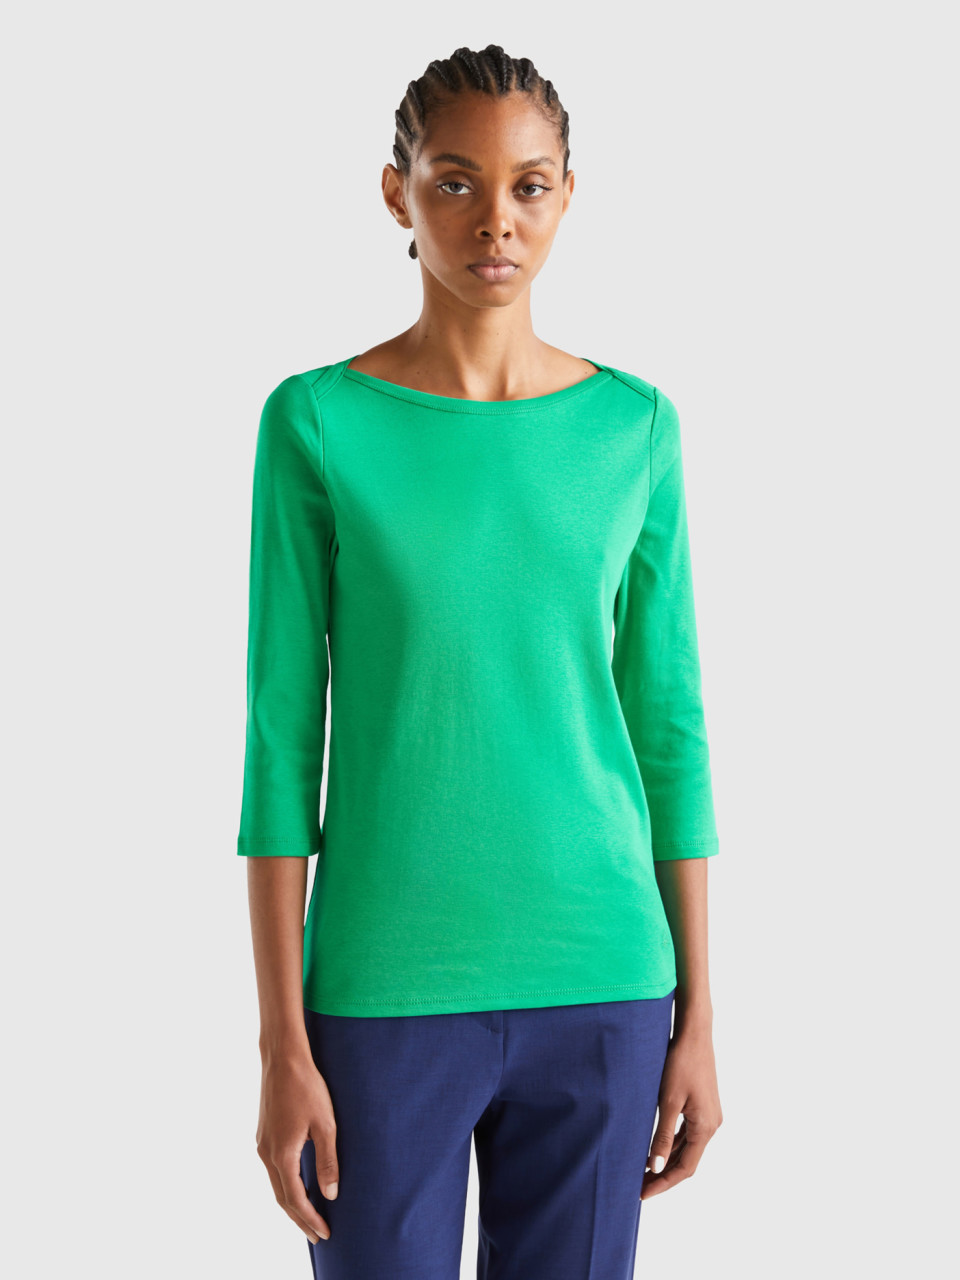 Benetton, T-shirt With Boat Neck In 100% Cotton, Green, Women